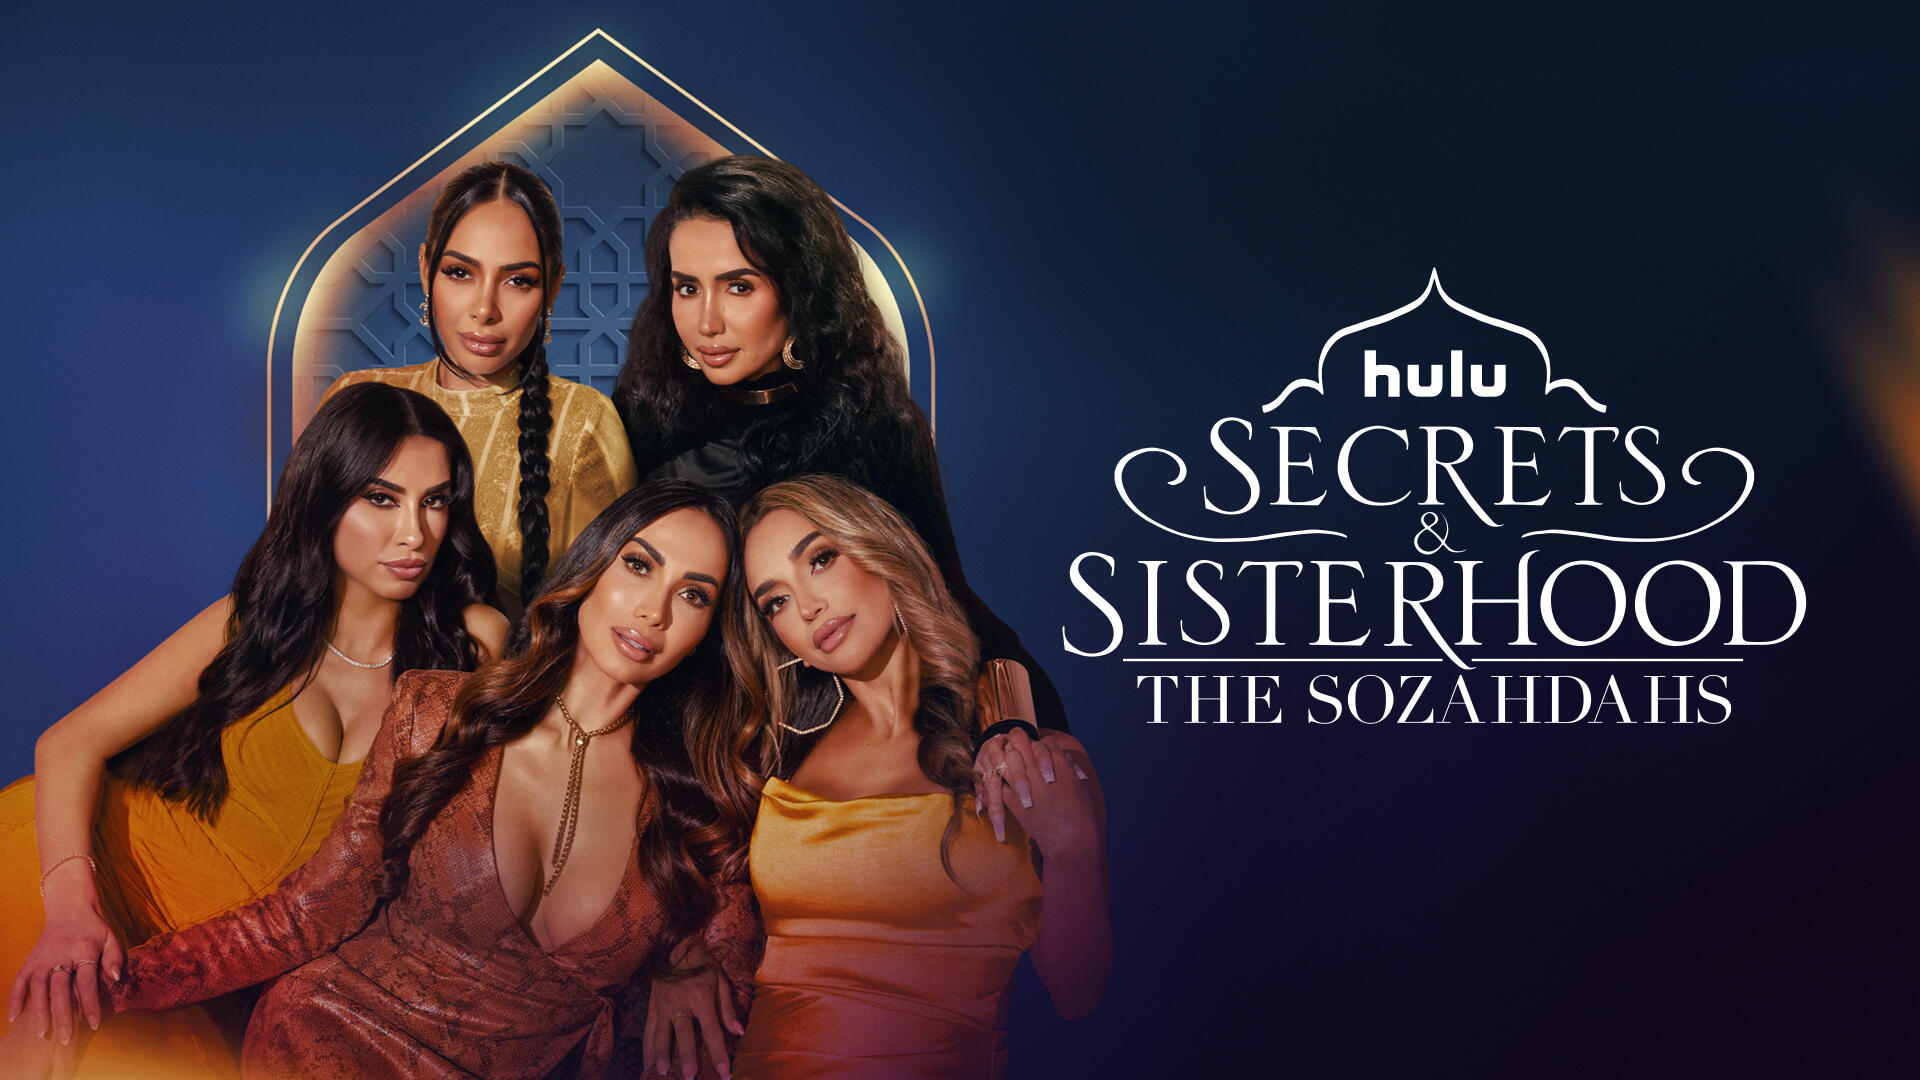 Secrets & Sisterhood: The Sozahdahs -- Season 1 -- Raw, real, and rife with shocking revelations, this new unscripted series follows 10 Muslim American sisters whose faith and bonds are put to the ultimate test while trying to navigate cultural expectations, their careers, and love in Los Angeles. The number #1 rule The Sozahdah sisters swear by is “family over everything.” But what happens when the secrets these sisters hold sacred are revealed and the TV show they thought would bring them together threatens to tear them apart? (Courtesy of Hulu)